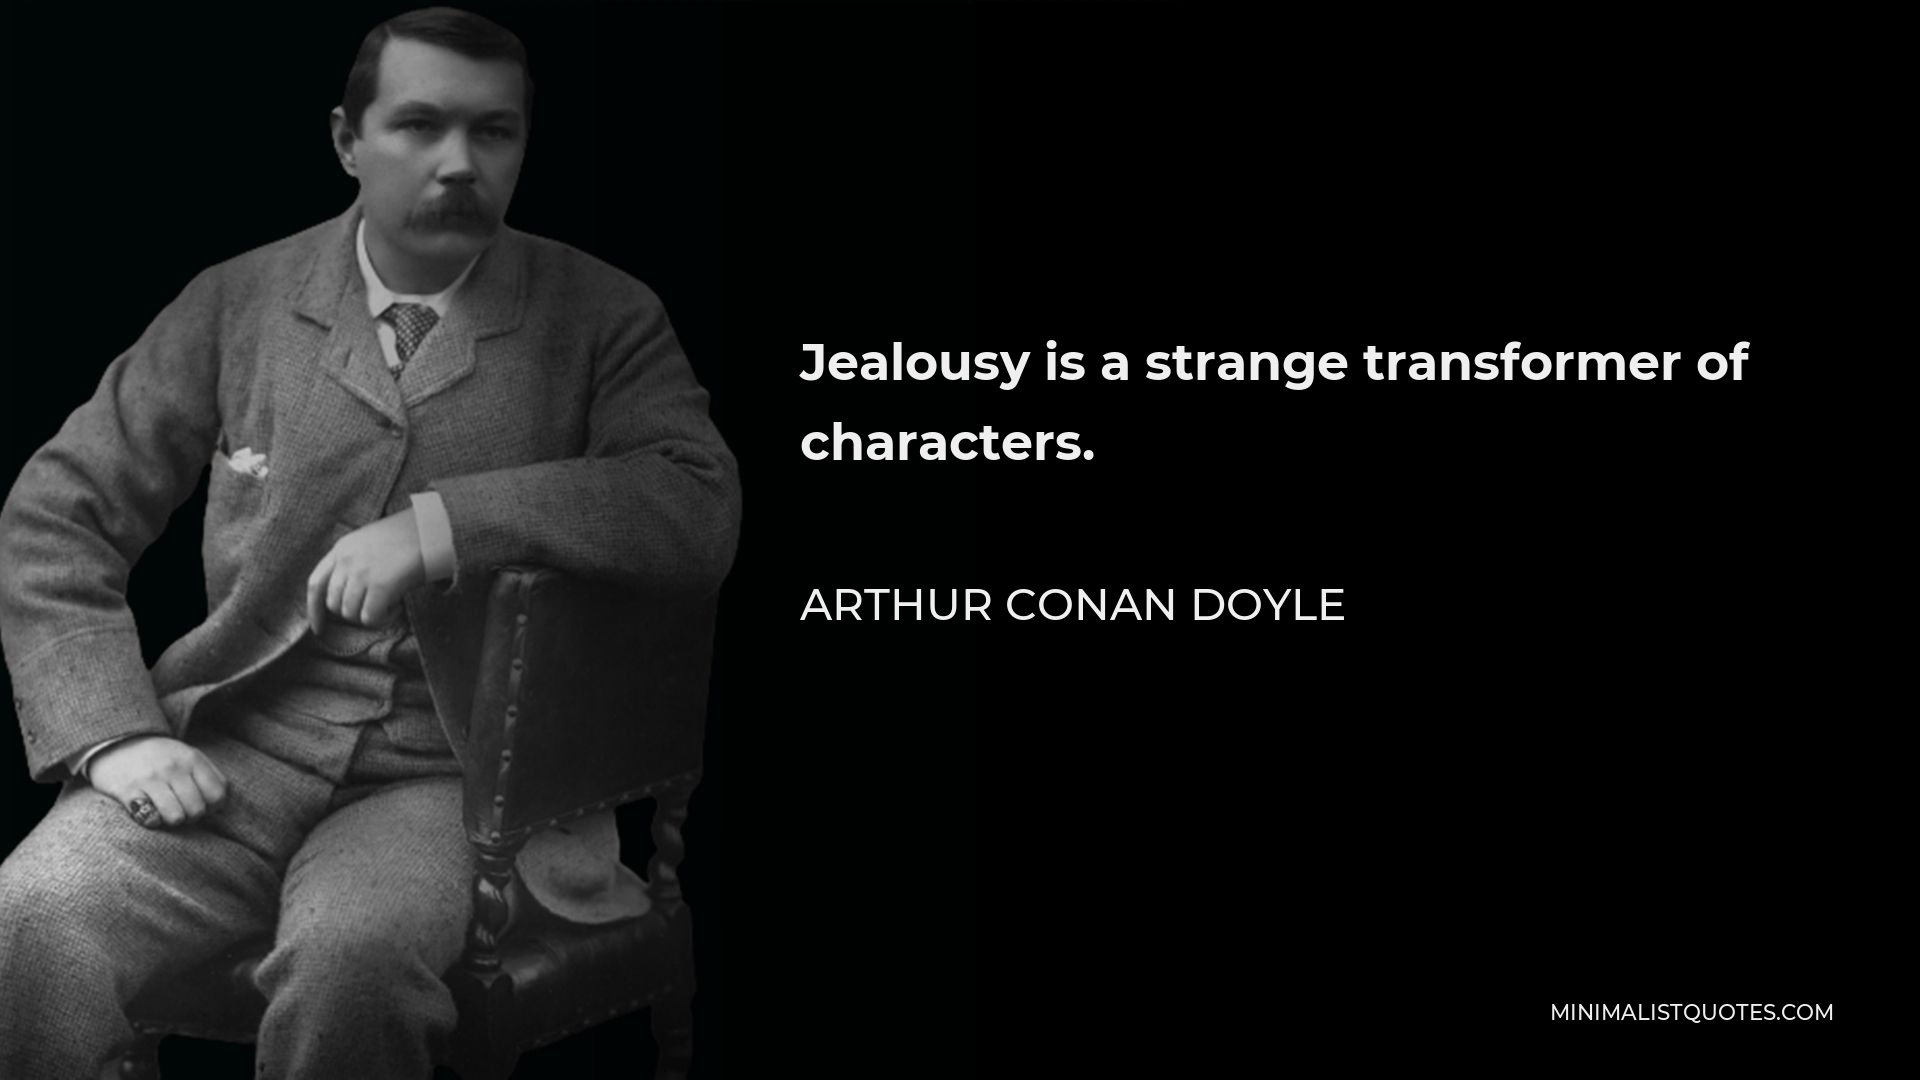 Arthur Conan Doyle Quote - Jealousy is a strange transformer of characters.